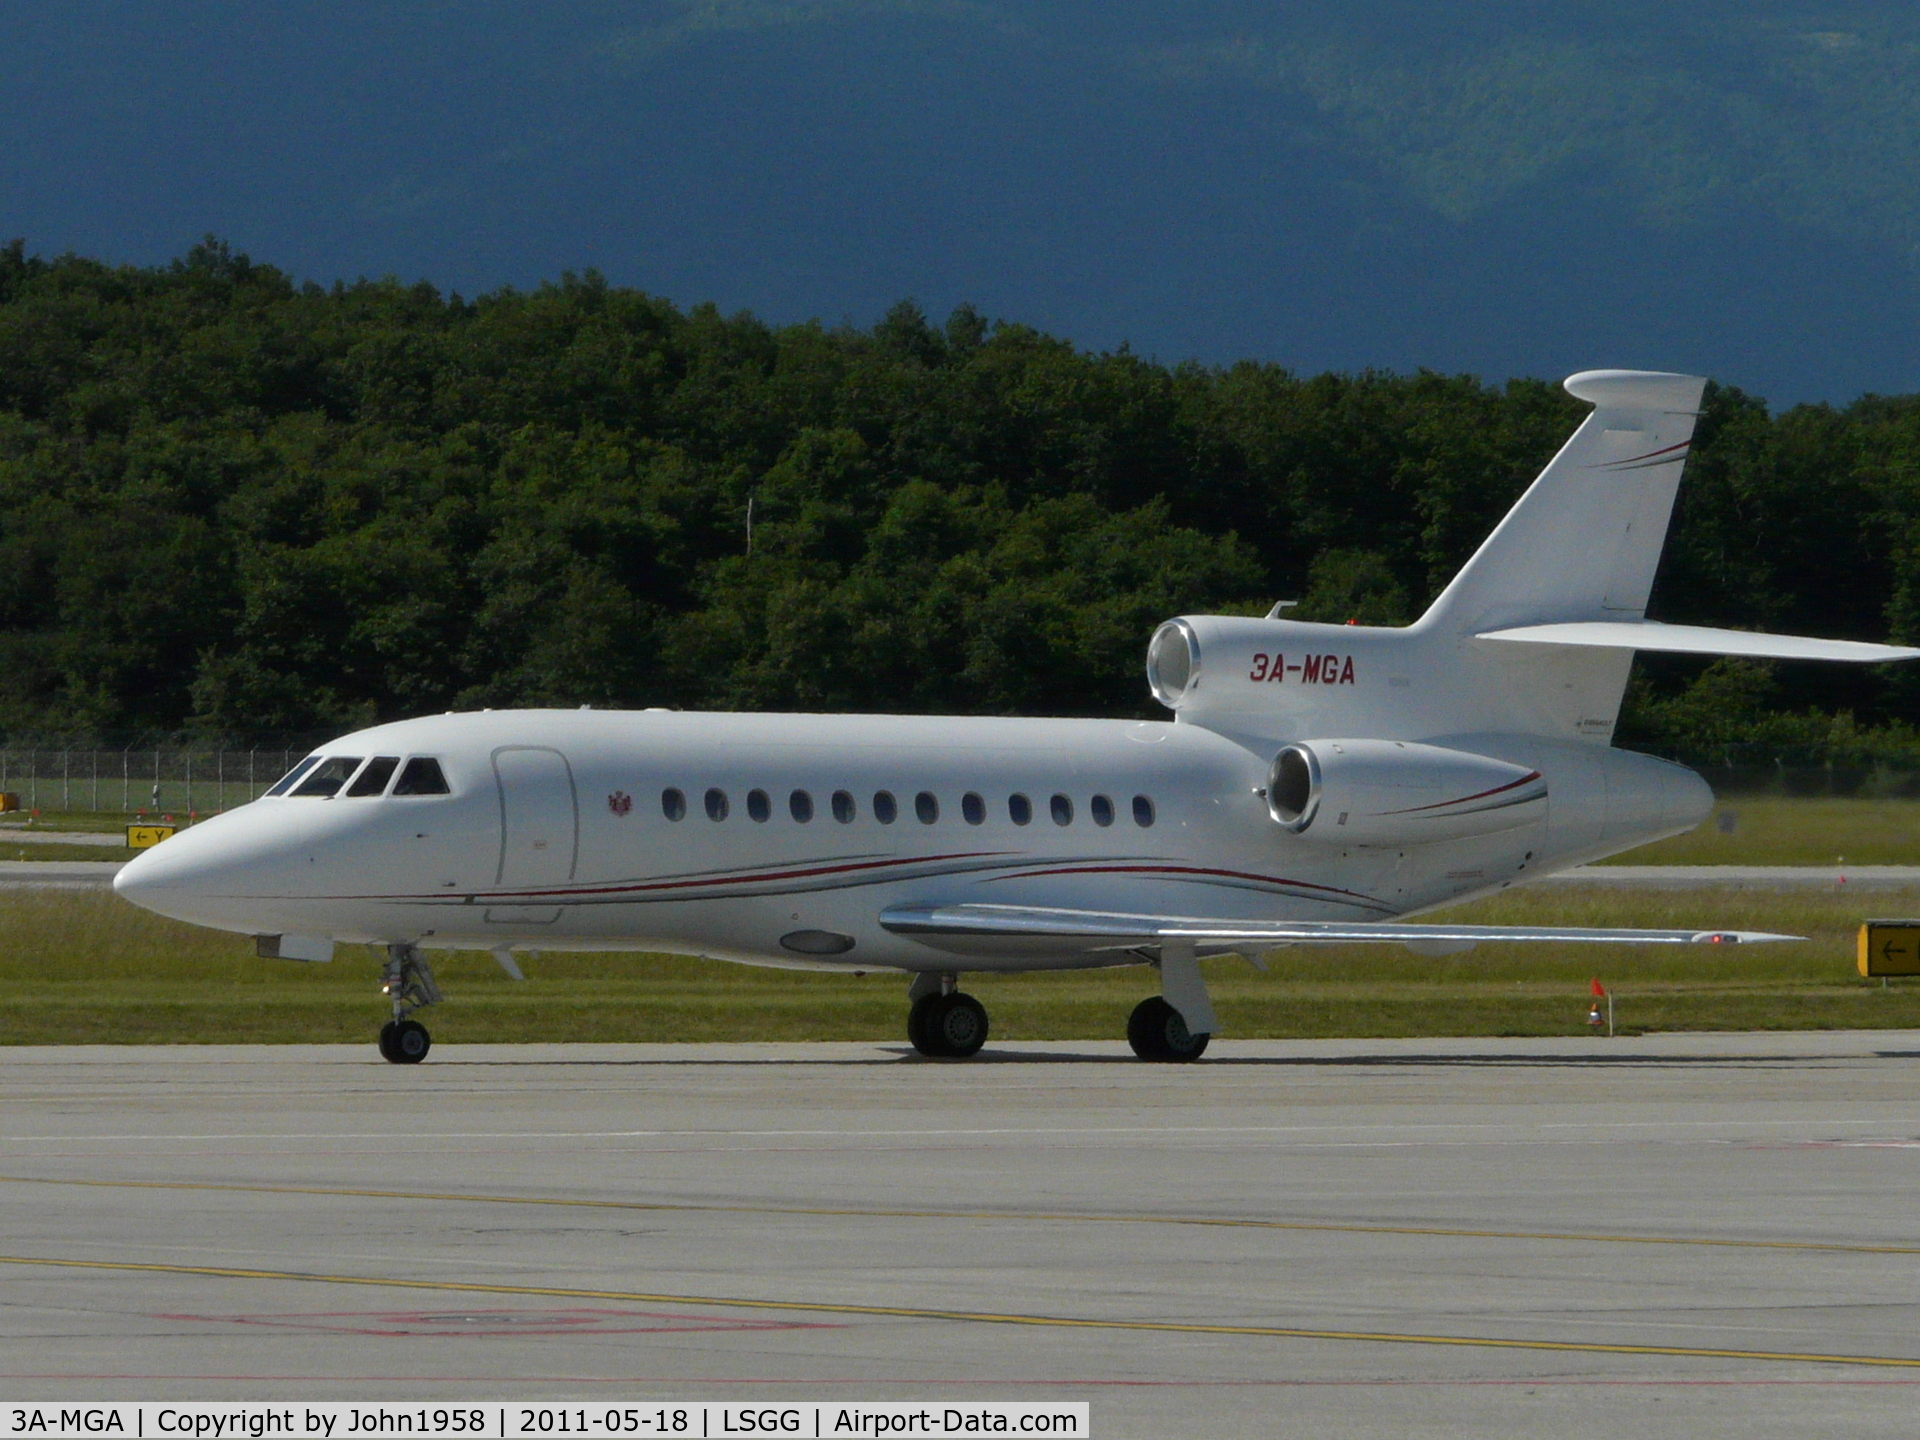 3A-MGA, 2013 Dassault Falcon 900EX C/N 195, Just arriving